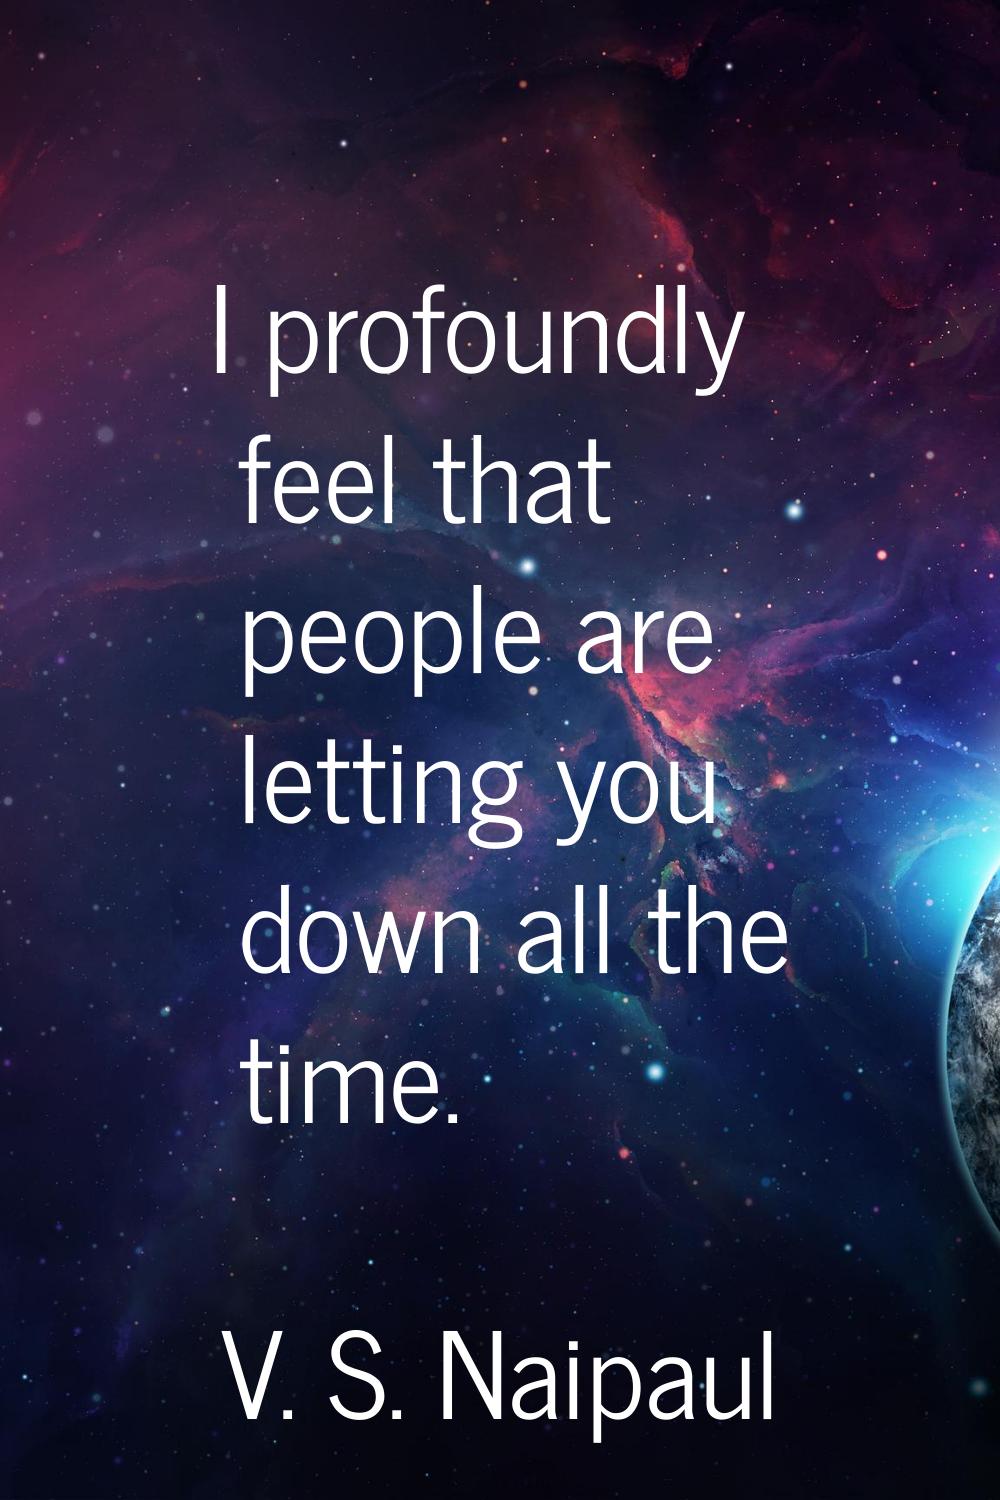 I profoundly feel that people are letting you down all the time.